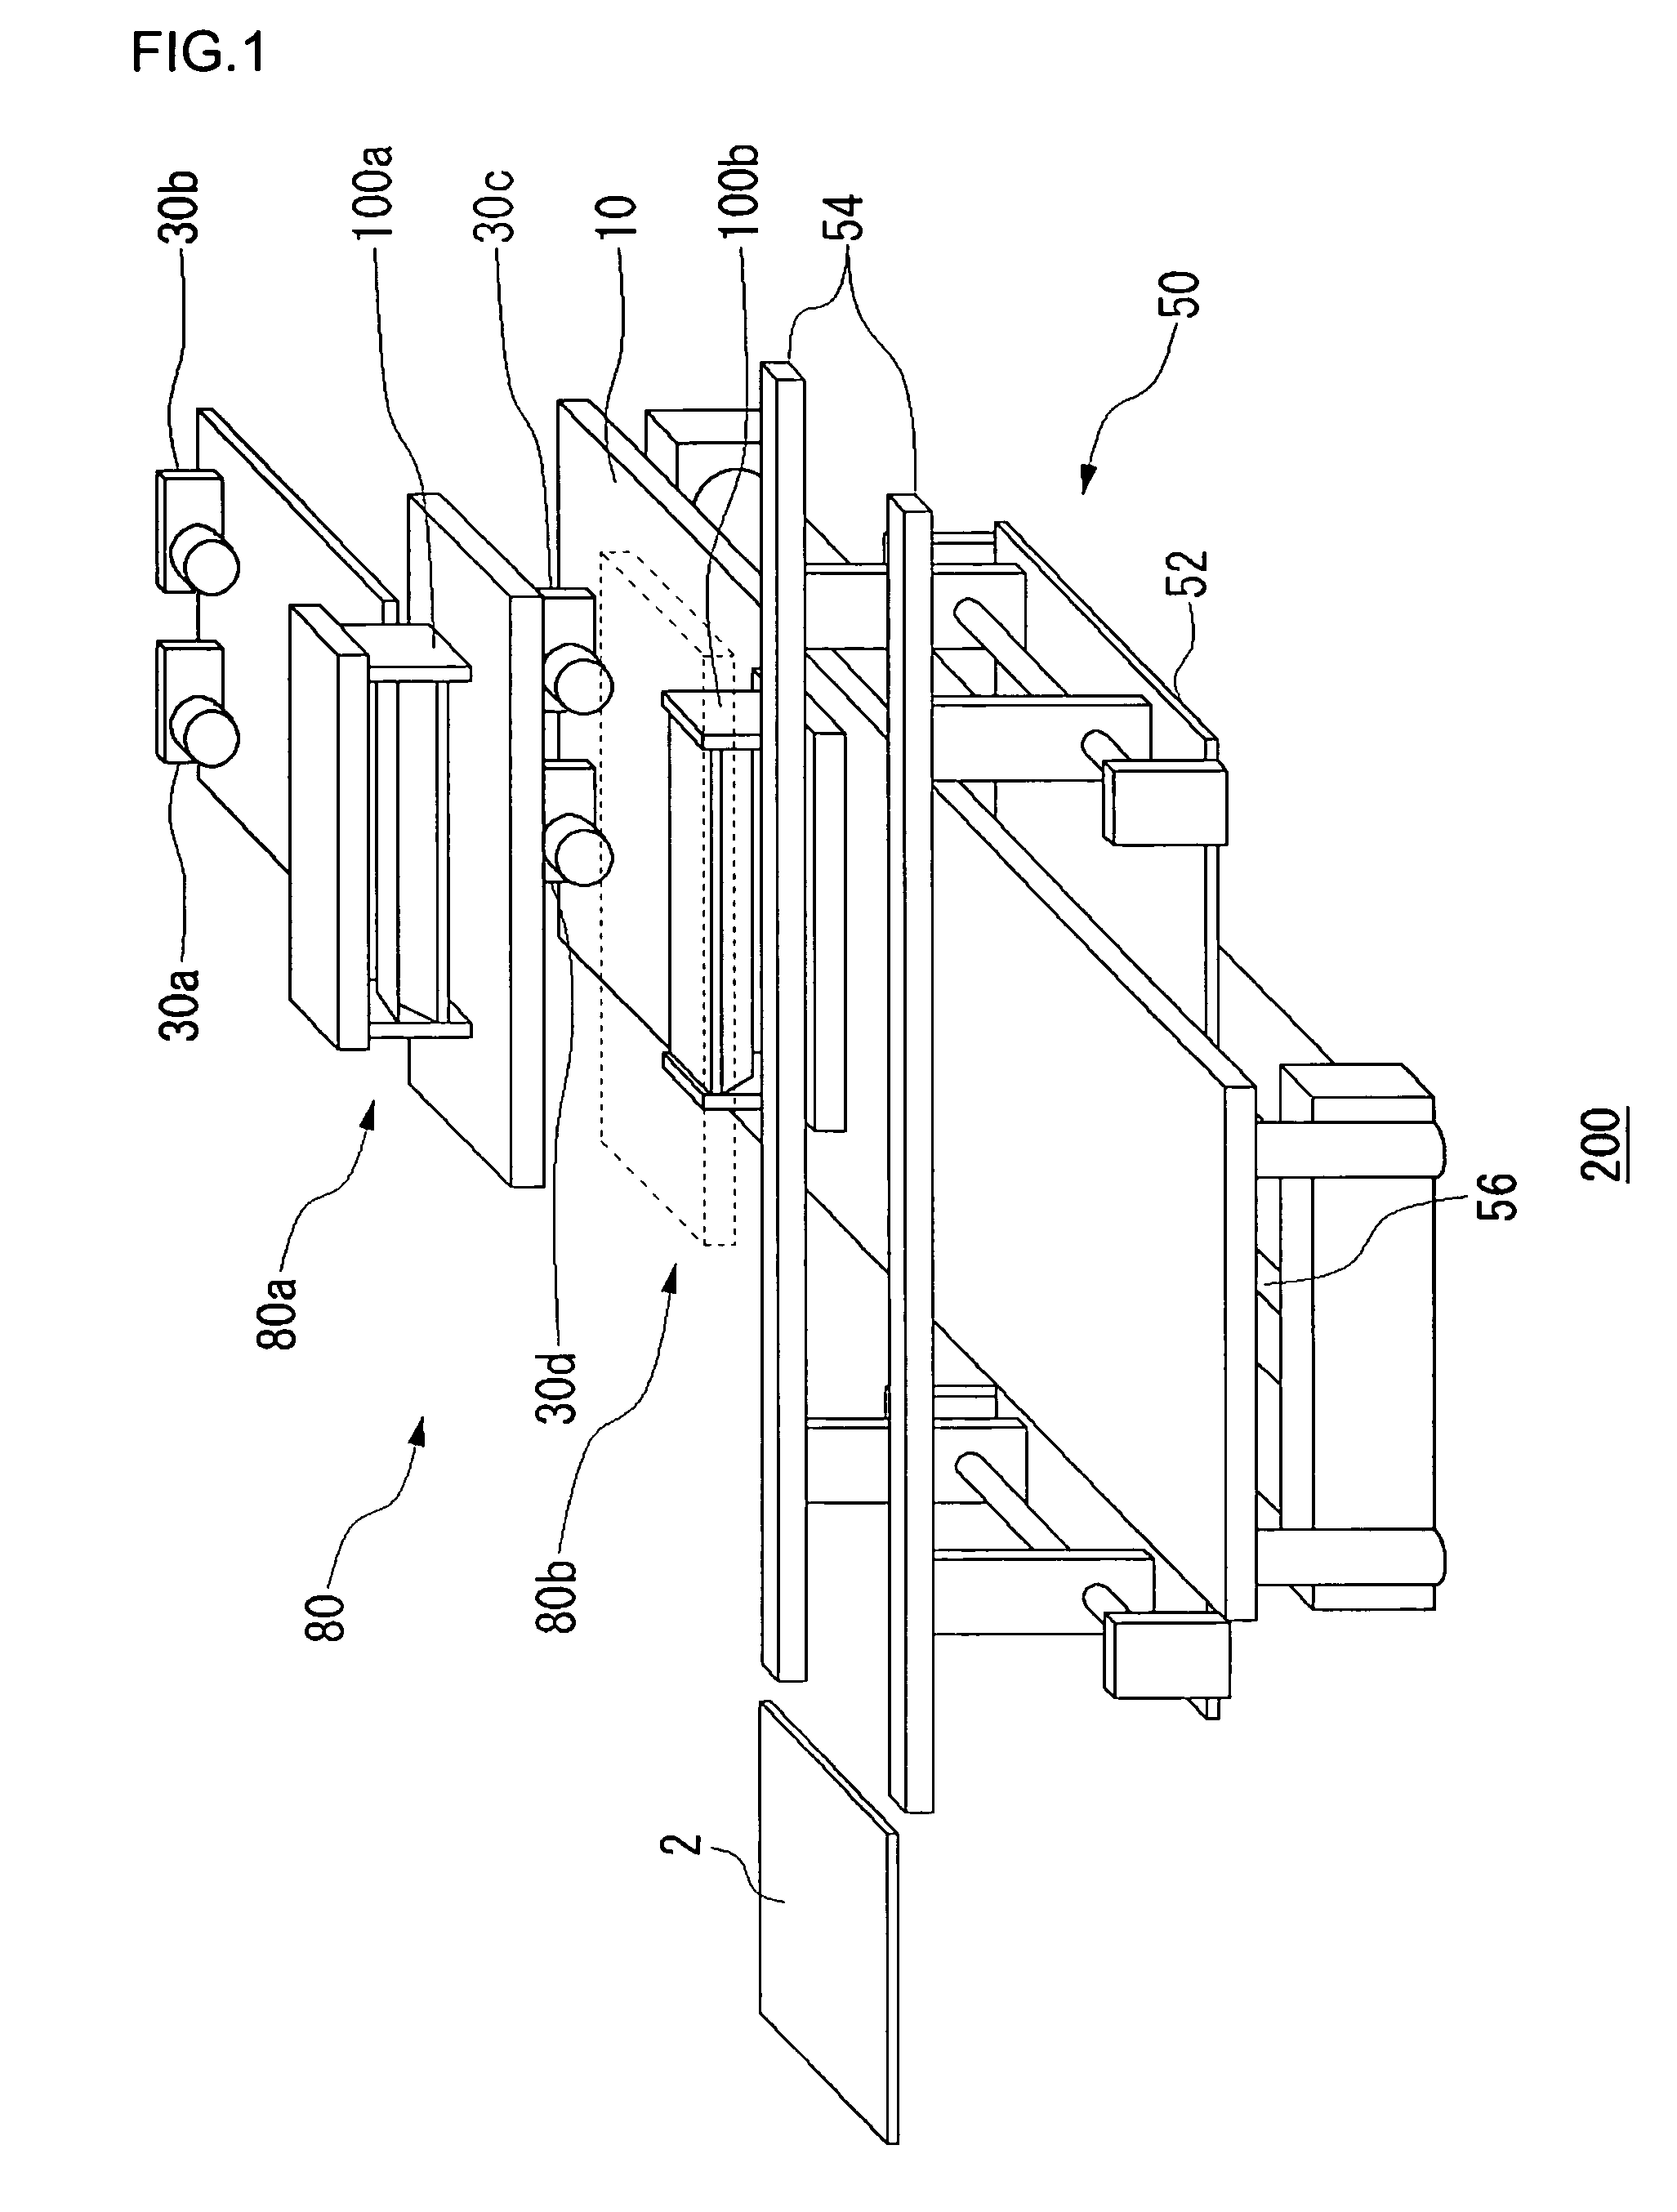 Appearance inspection apparatus for inspecting inspection piece